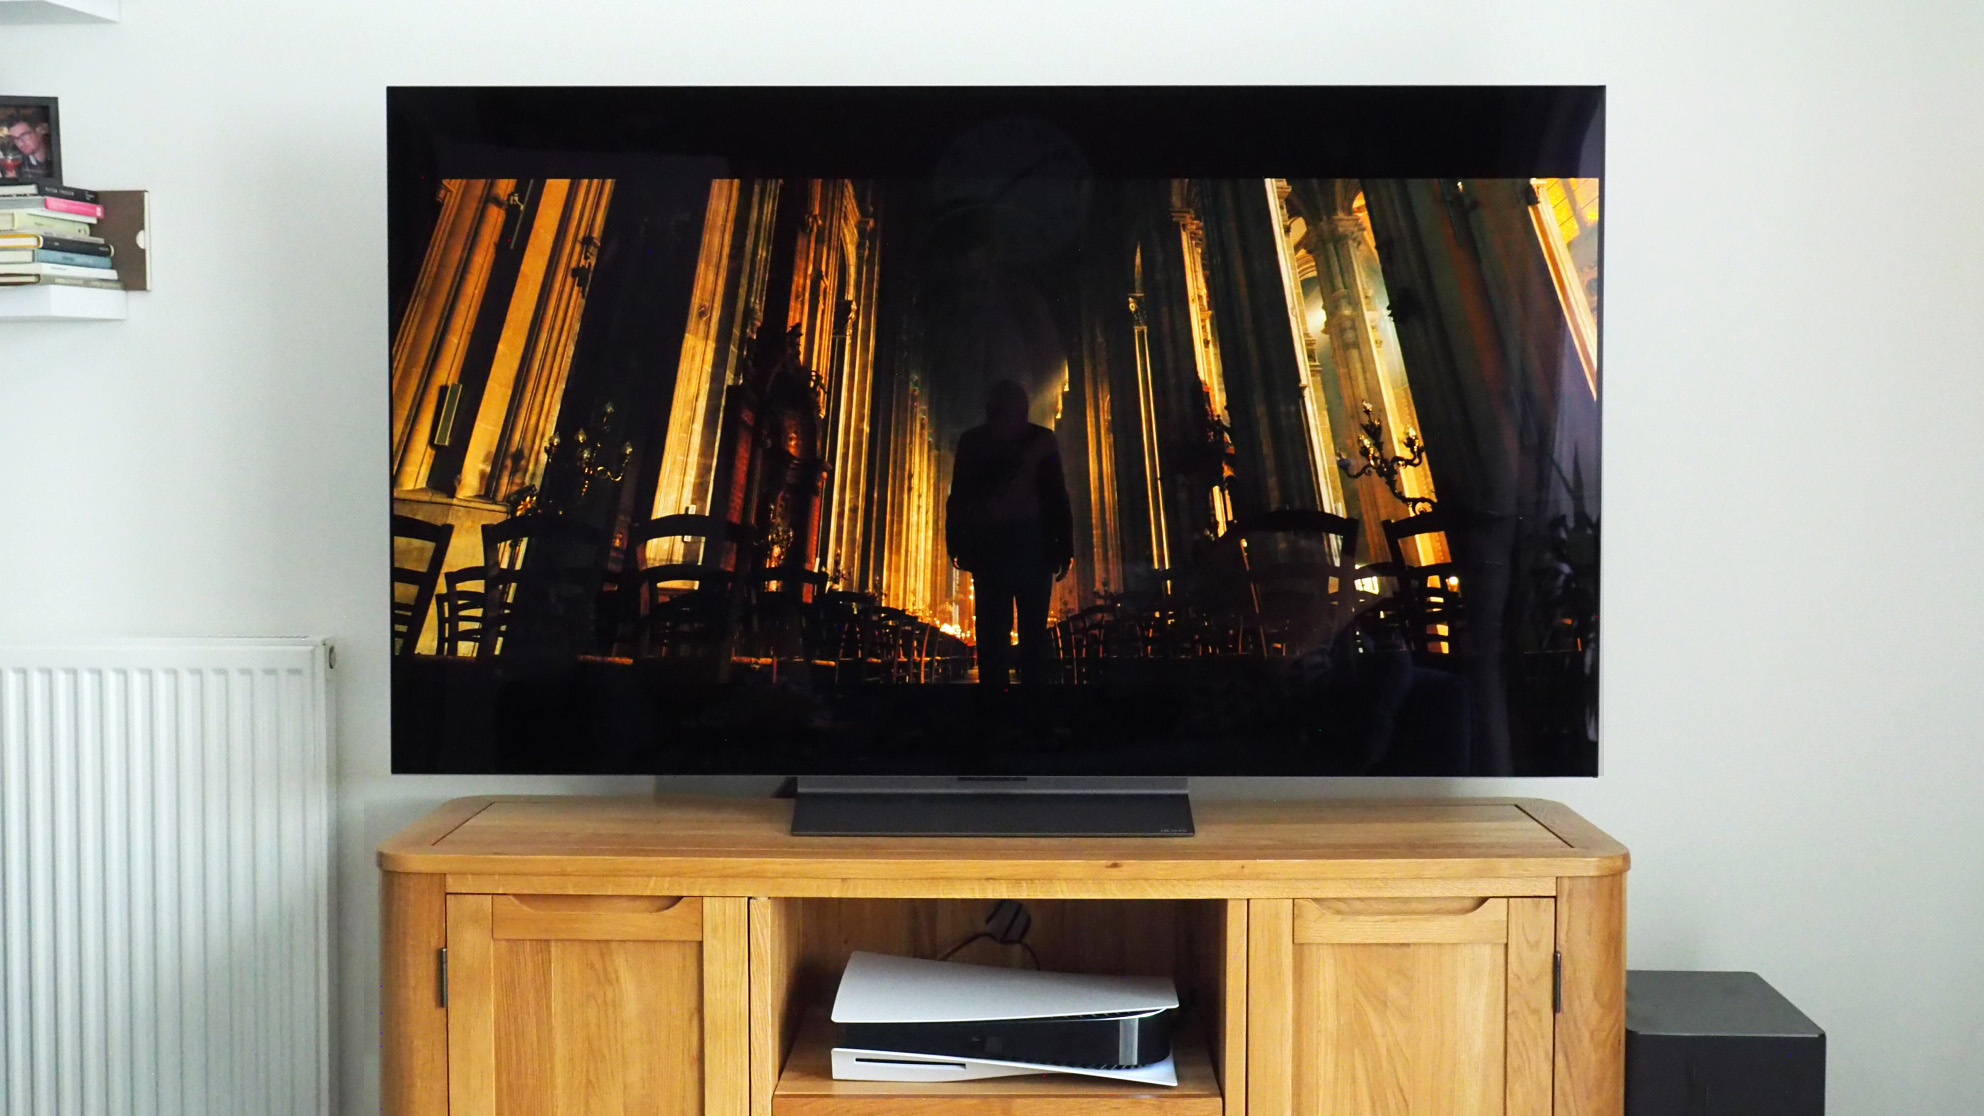 LG C3 42-inch review: a small upgrade but still best in class